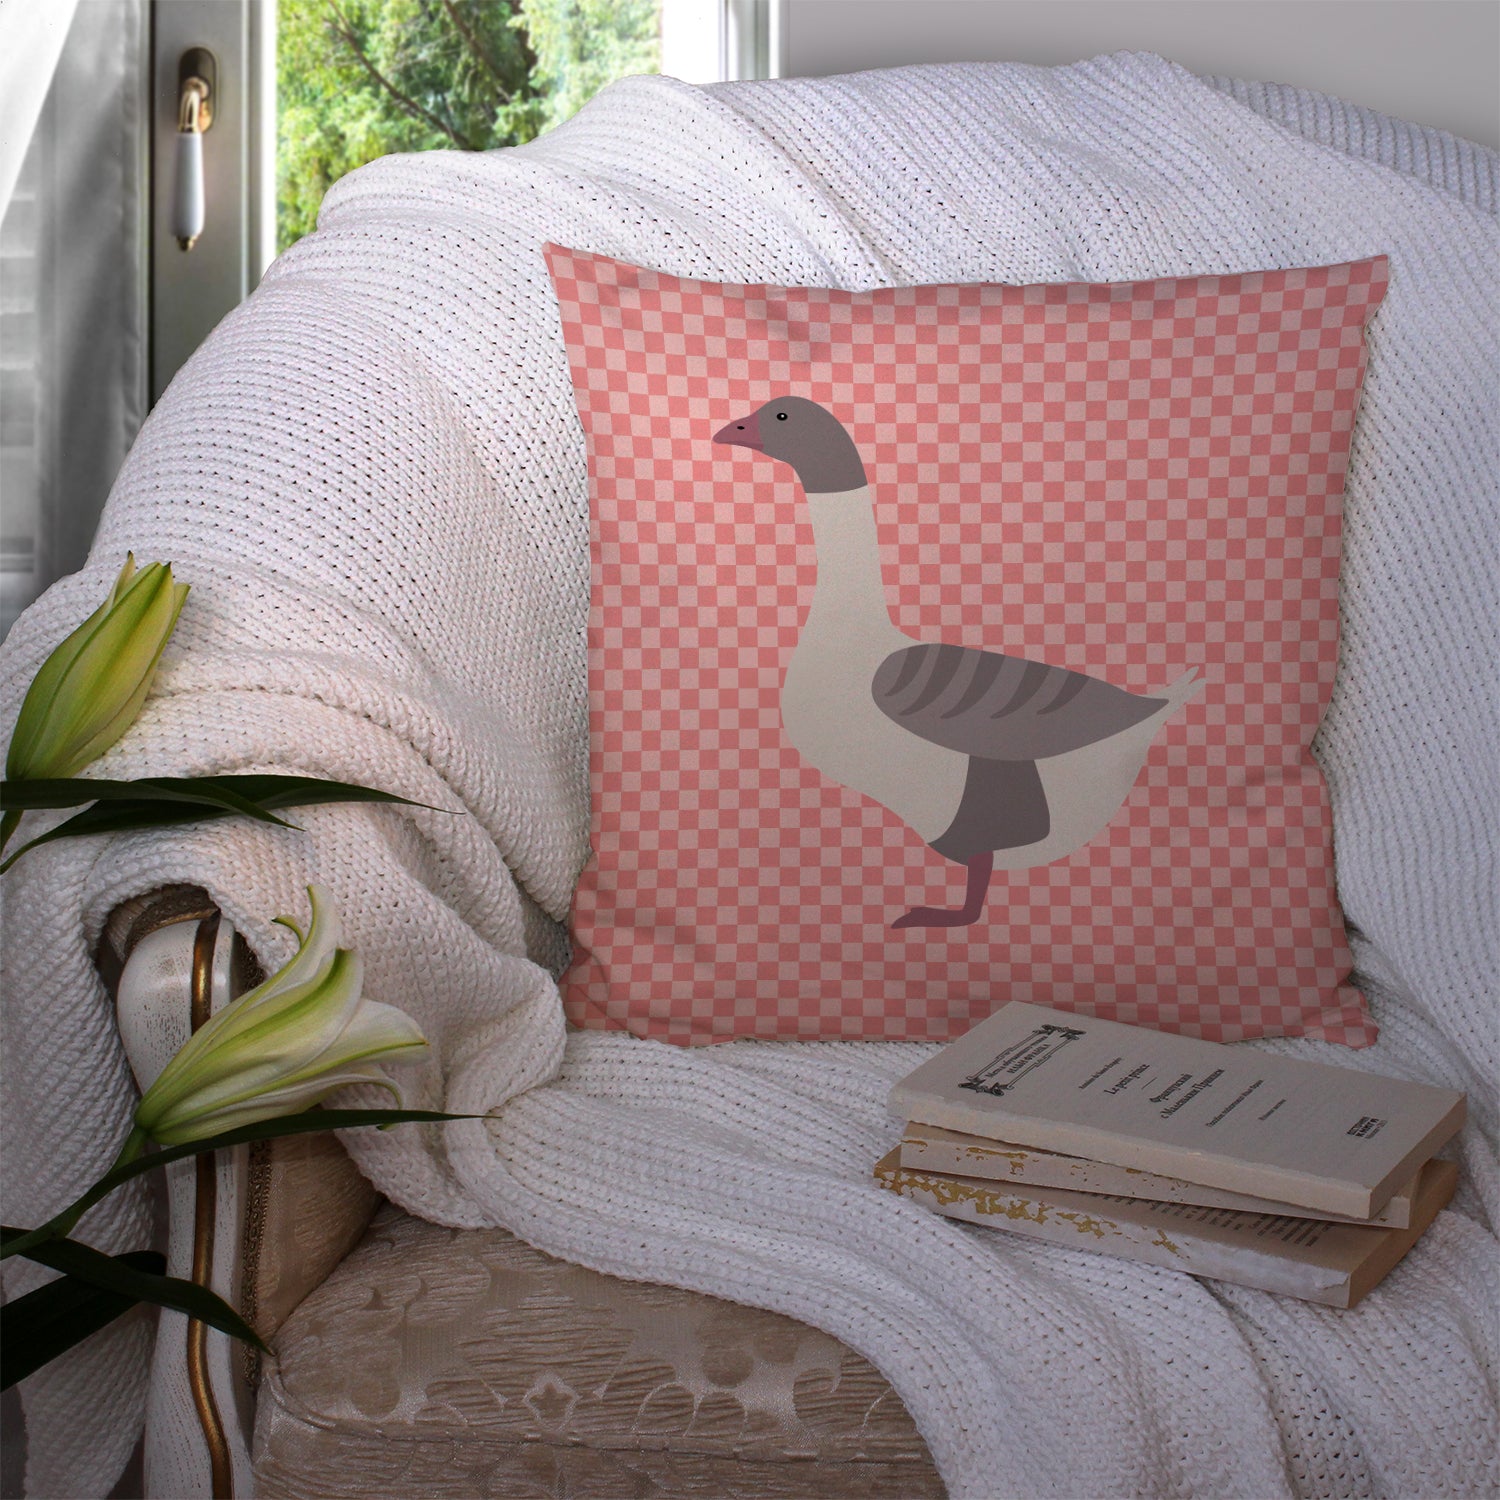 Buff Grey Back Goose Pink Check Fabric Decorative Pillow BB7901PW1414 - the-store.com